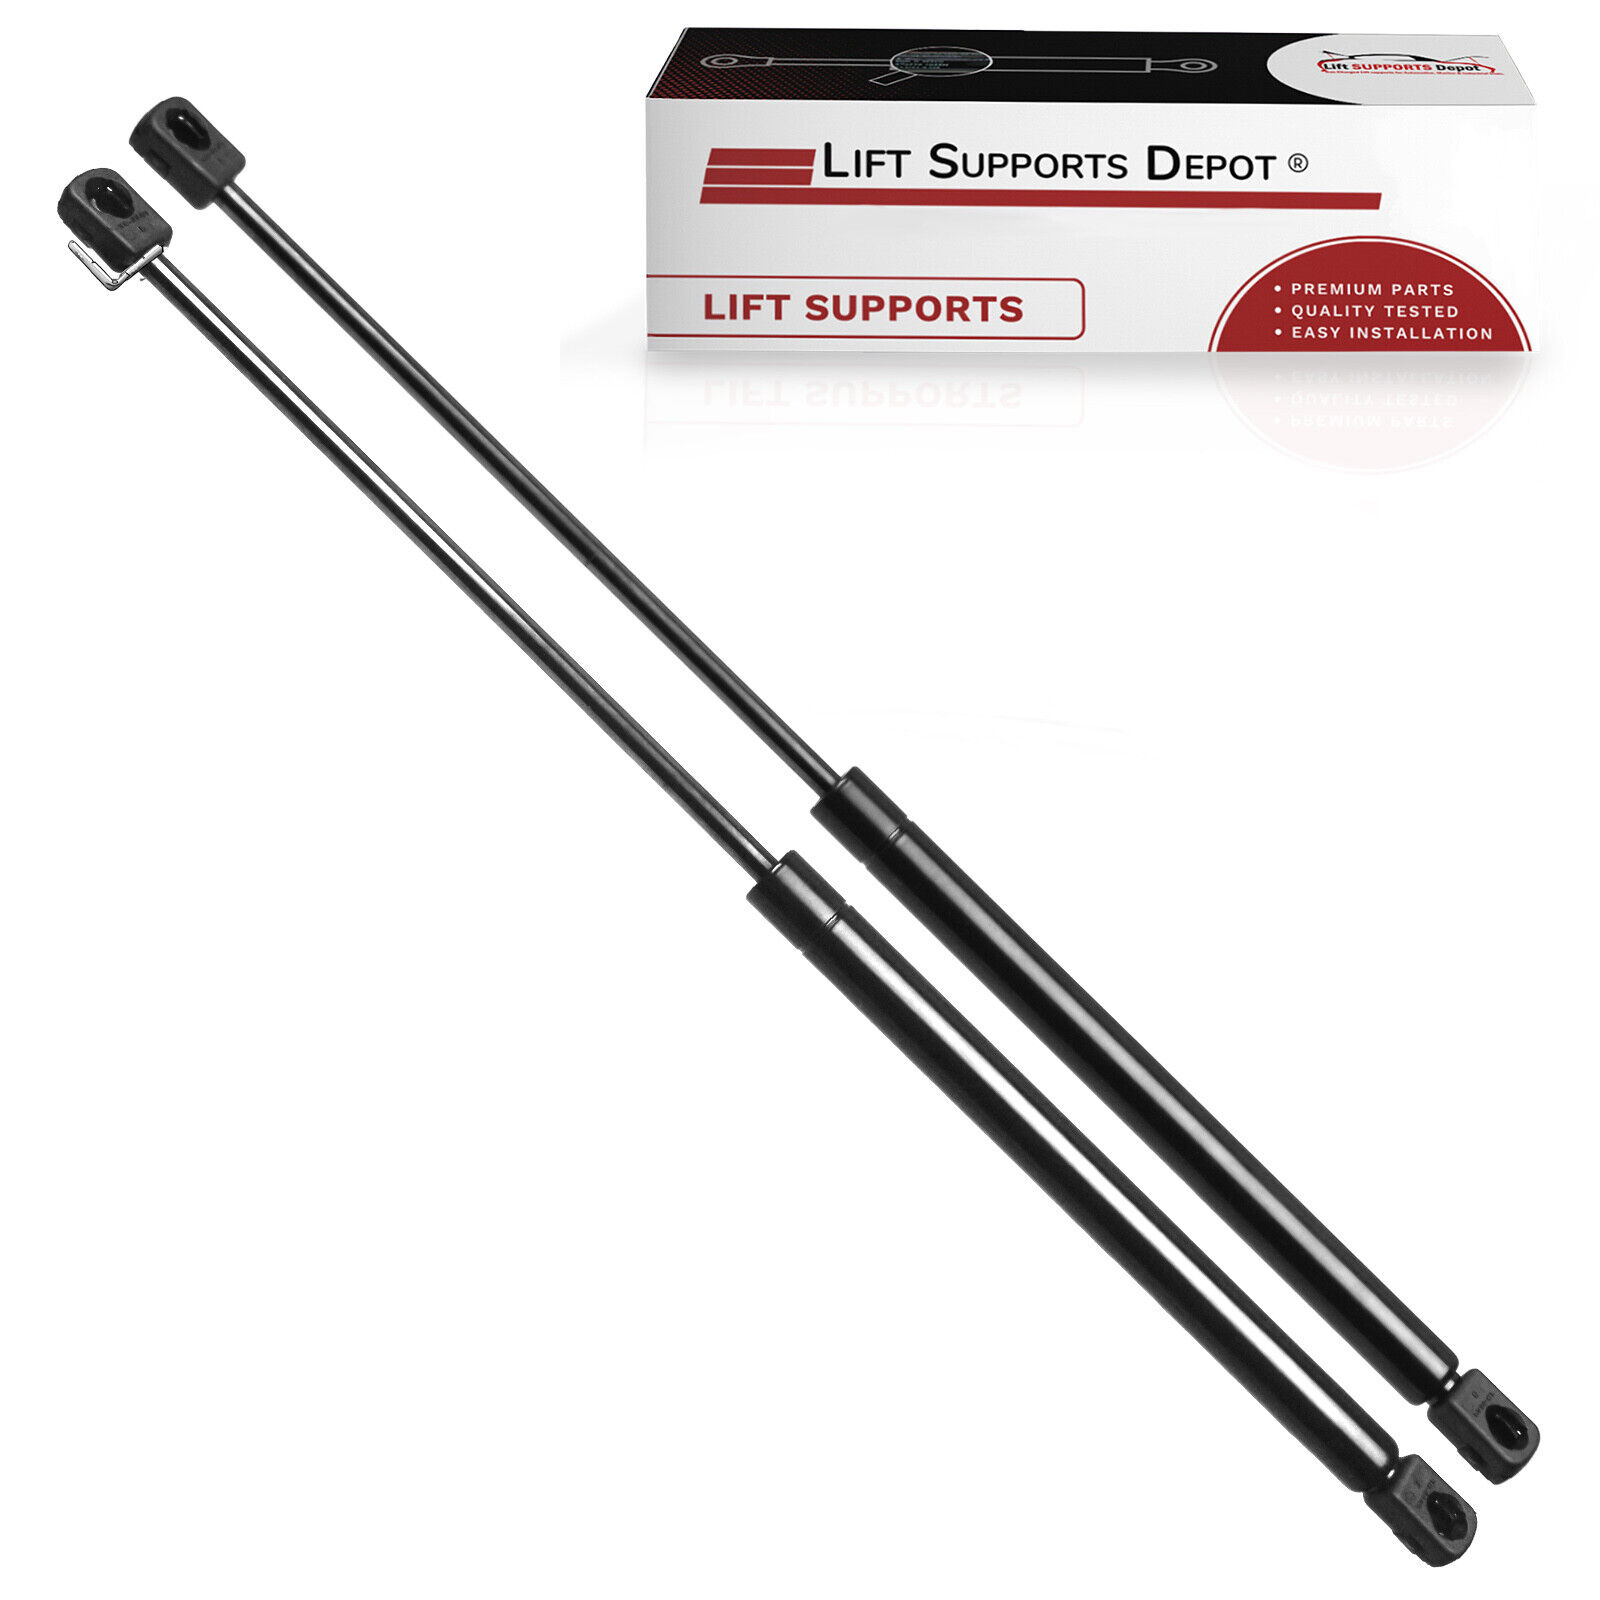 Qty 2 Fits Arnarge 98 to 09 Hood Lift Supports W/O Wire Hardware